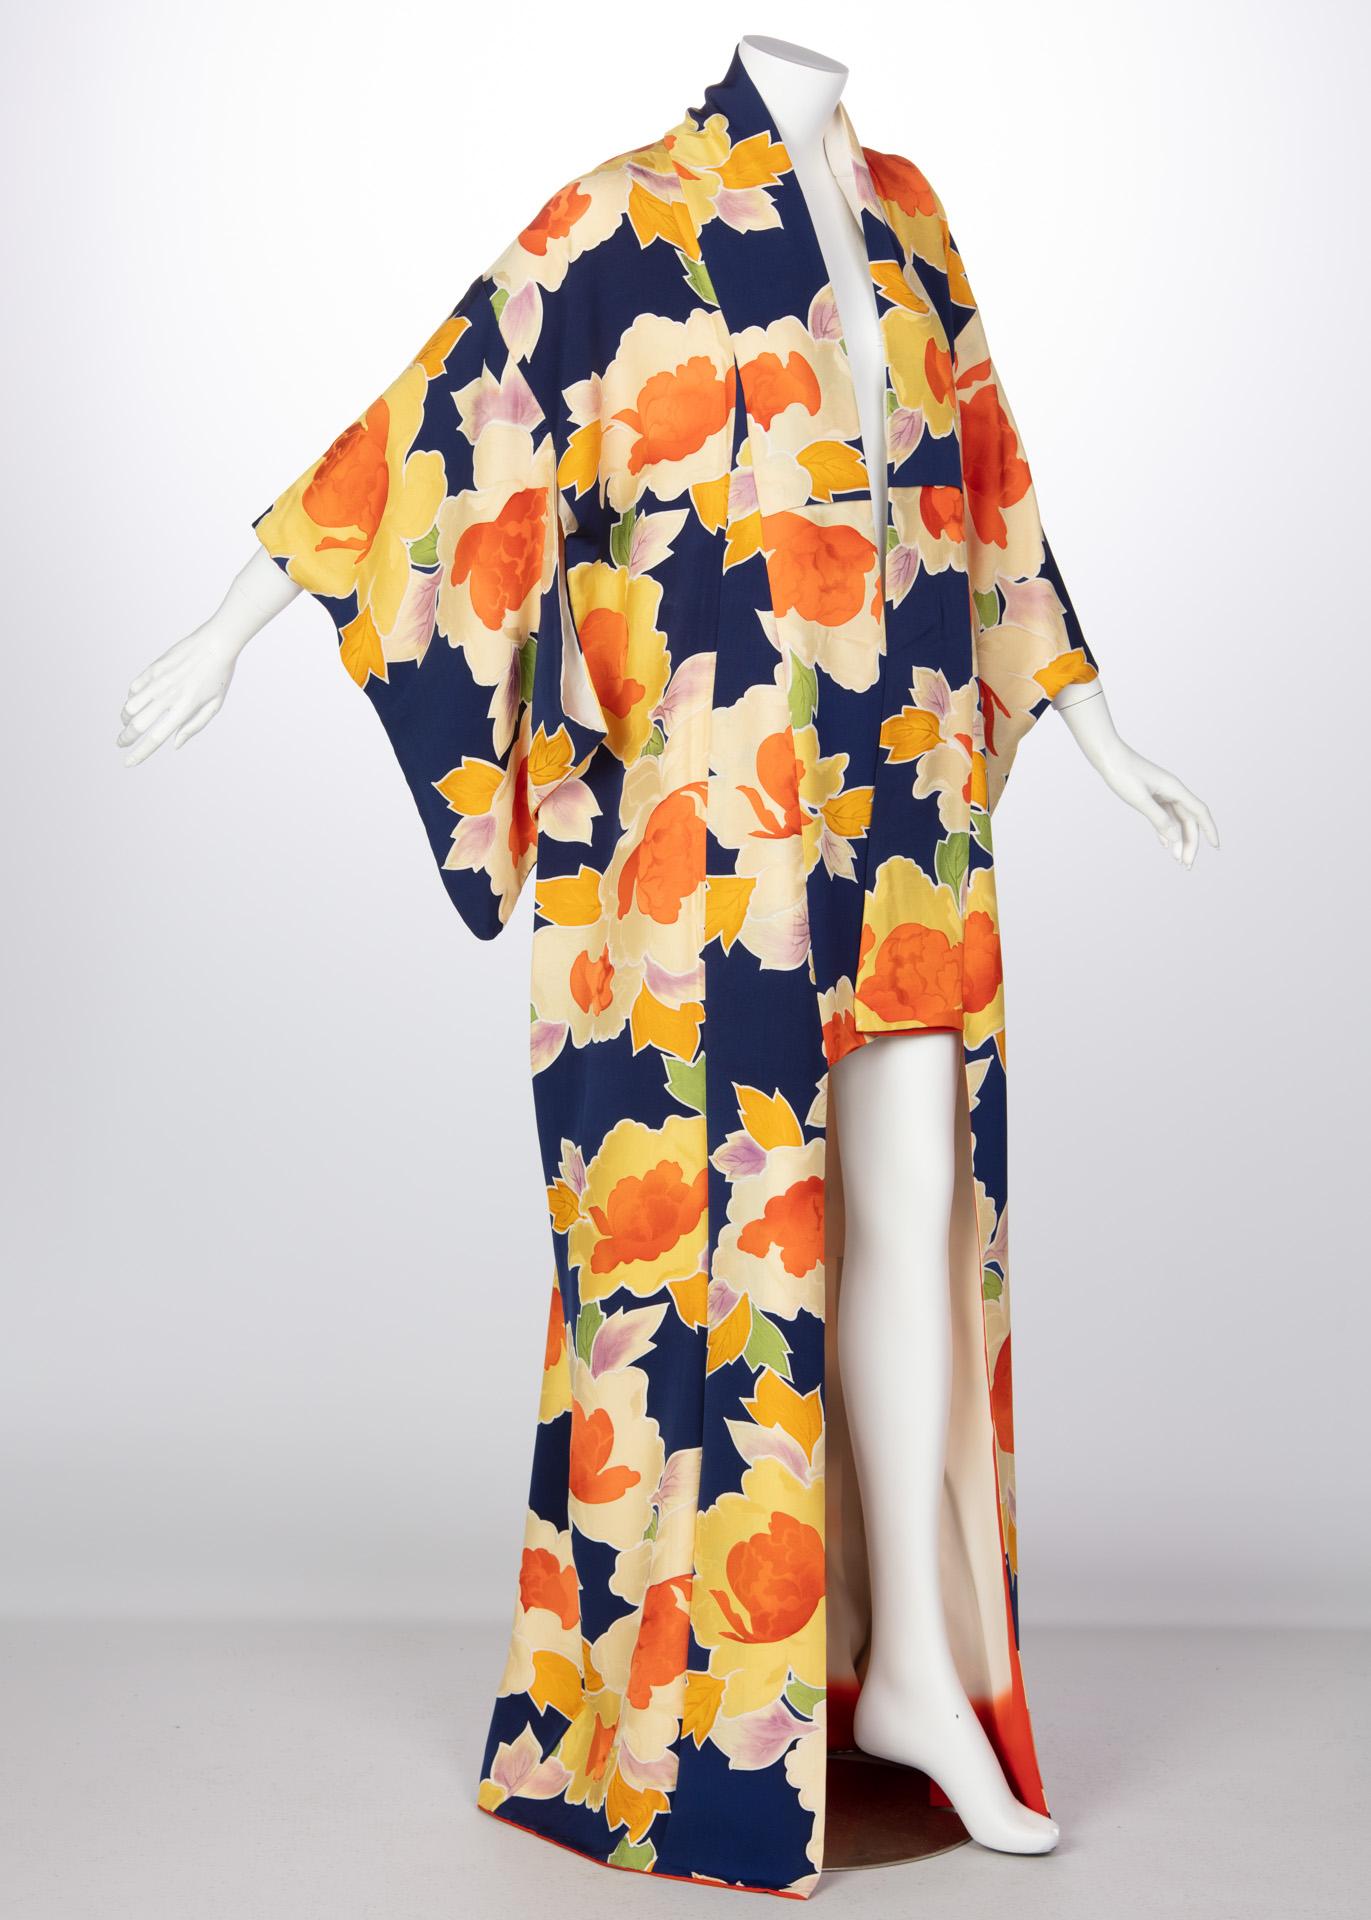 The traditional dress form Japan, kimono and kimono inspired styles have become a universal craze. Often being made from luxurious silks or other fine fabrics, kimonos showcase rich embroidery often of natural imagery such as florals or birds. This